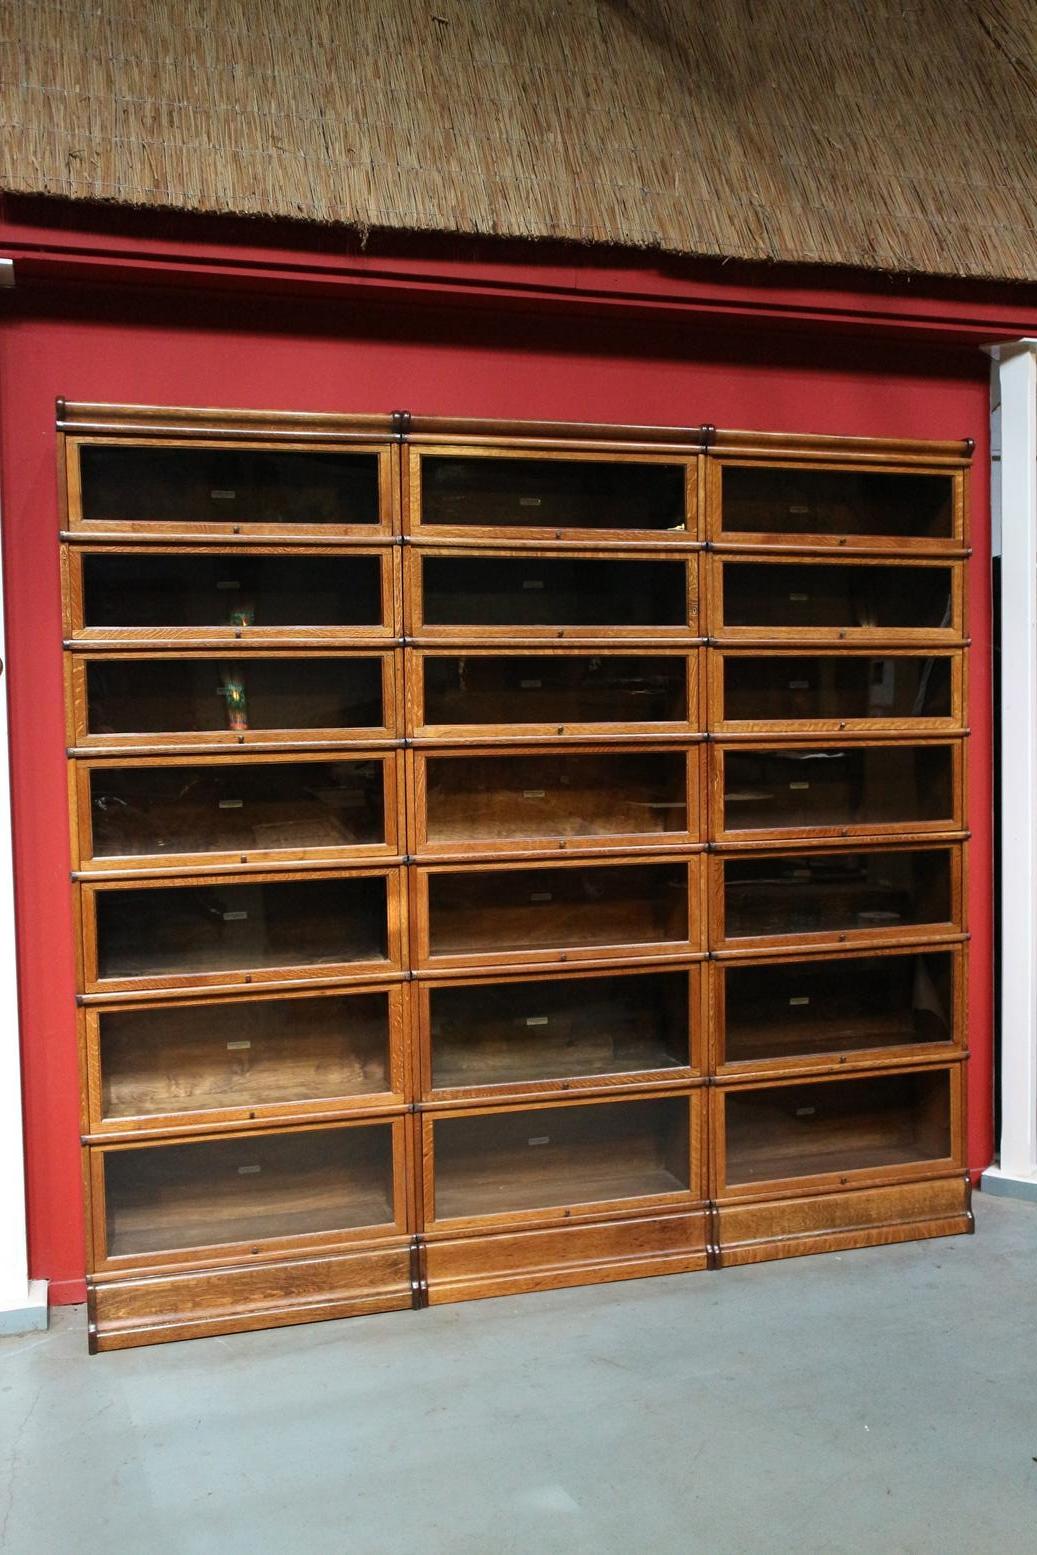 Beautiful antique oak Globe Wernicke bookcase. Entirely in perfect condition. The cabinet consists of 21 stackable parts.
Origin: England
Period: Approx. 1895-1910
Measure: 260cm x 29cm x H.241cm.